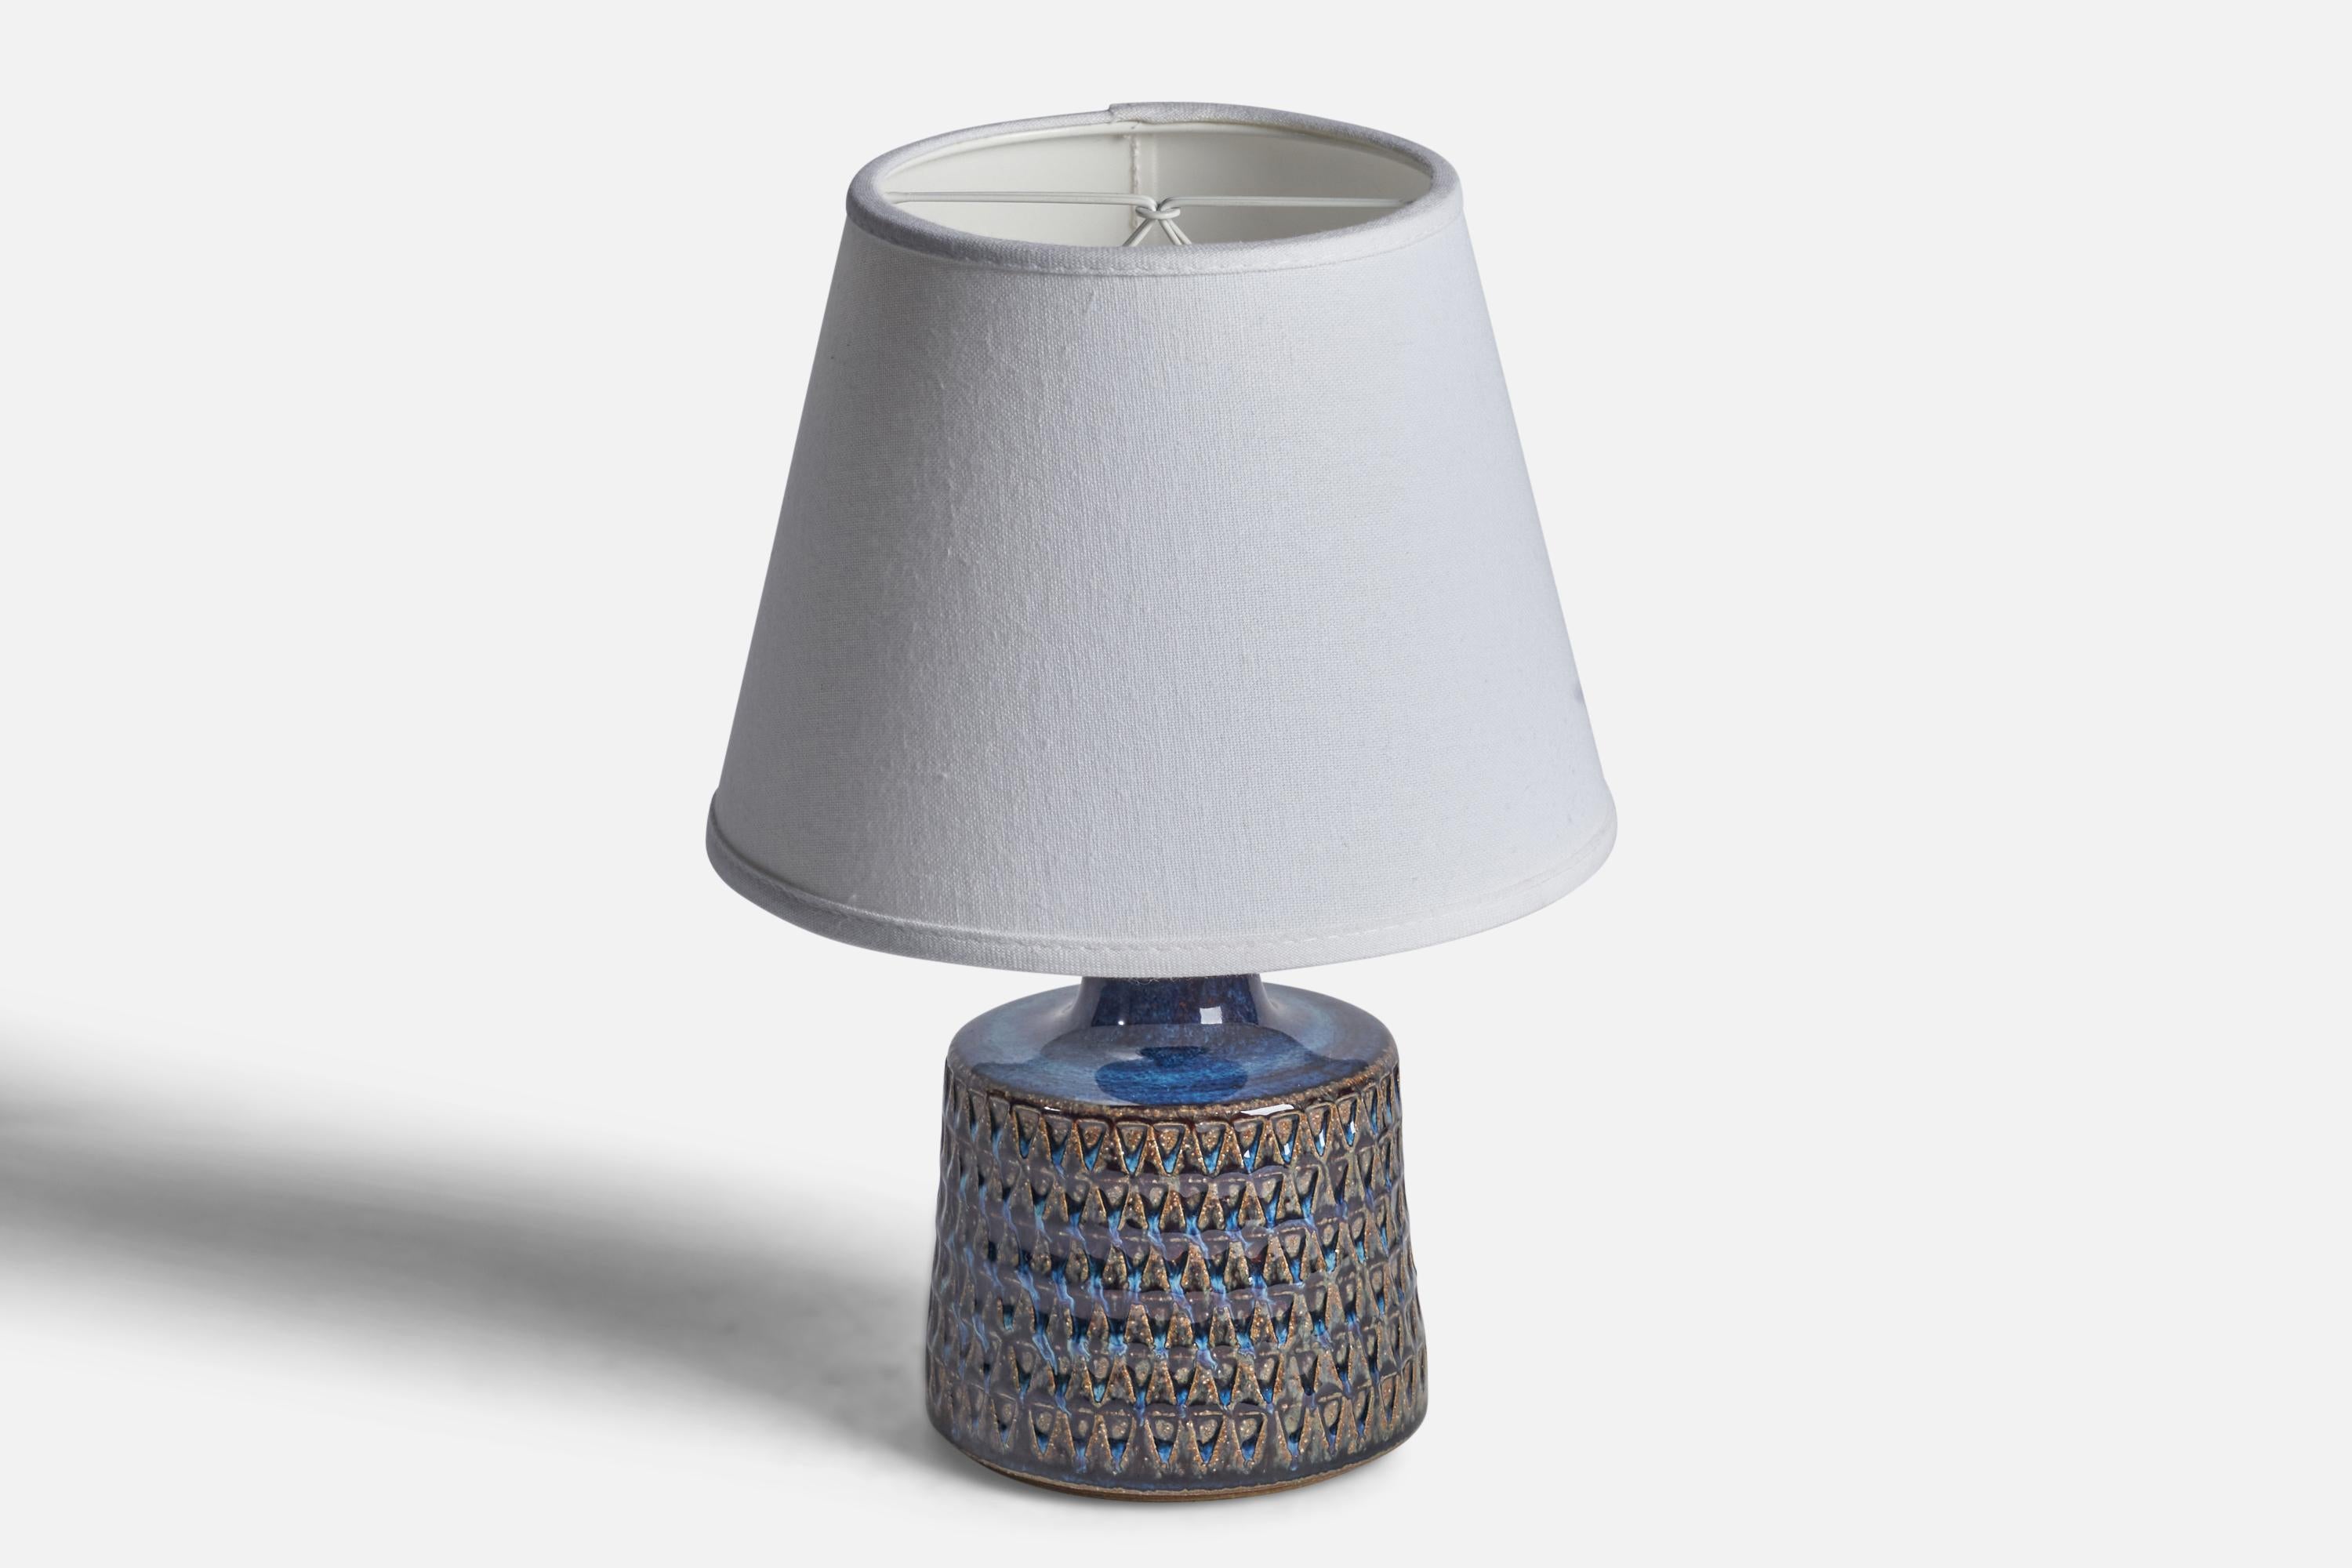 A blue and brown-glazed incised stoneware table lamp designed and produced by Søholm, Denmark, 1960s.

Dimensions of Lamp (inches): 9” H x 4.75” Diameter
Dimensions of Shade (inches): 5” Top Diameter x 8” Bottom Diameter x 6” H 
Dimensions of Lamp